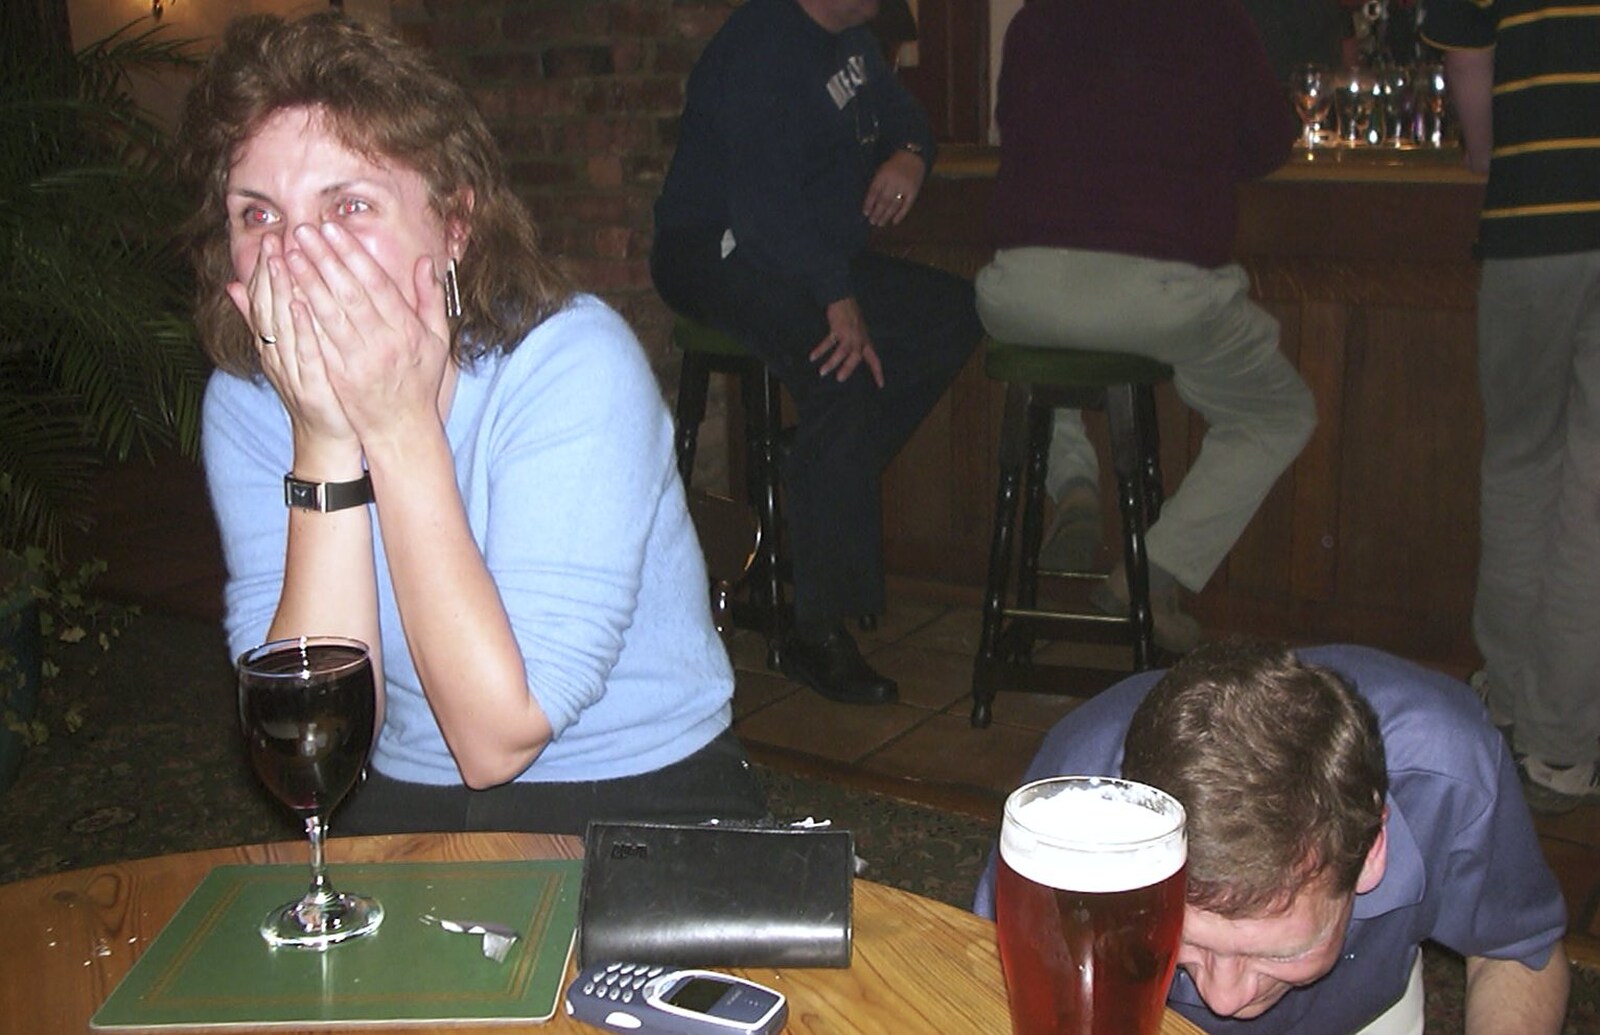 The BSCC Bike Ride, Shefford, Bedford - 11th May 2002: Anne laughs as Apple disappears under the table